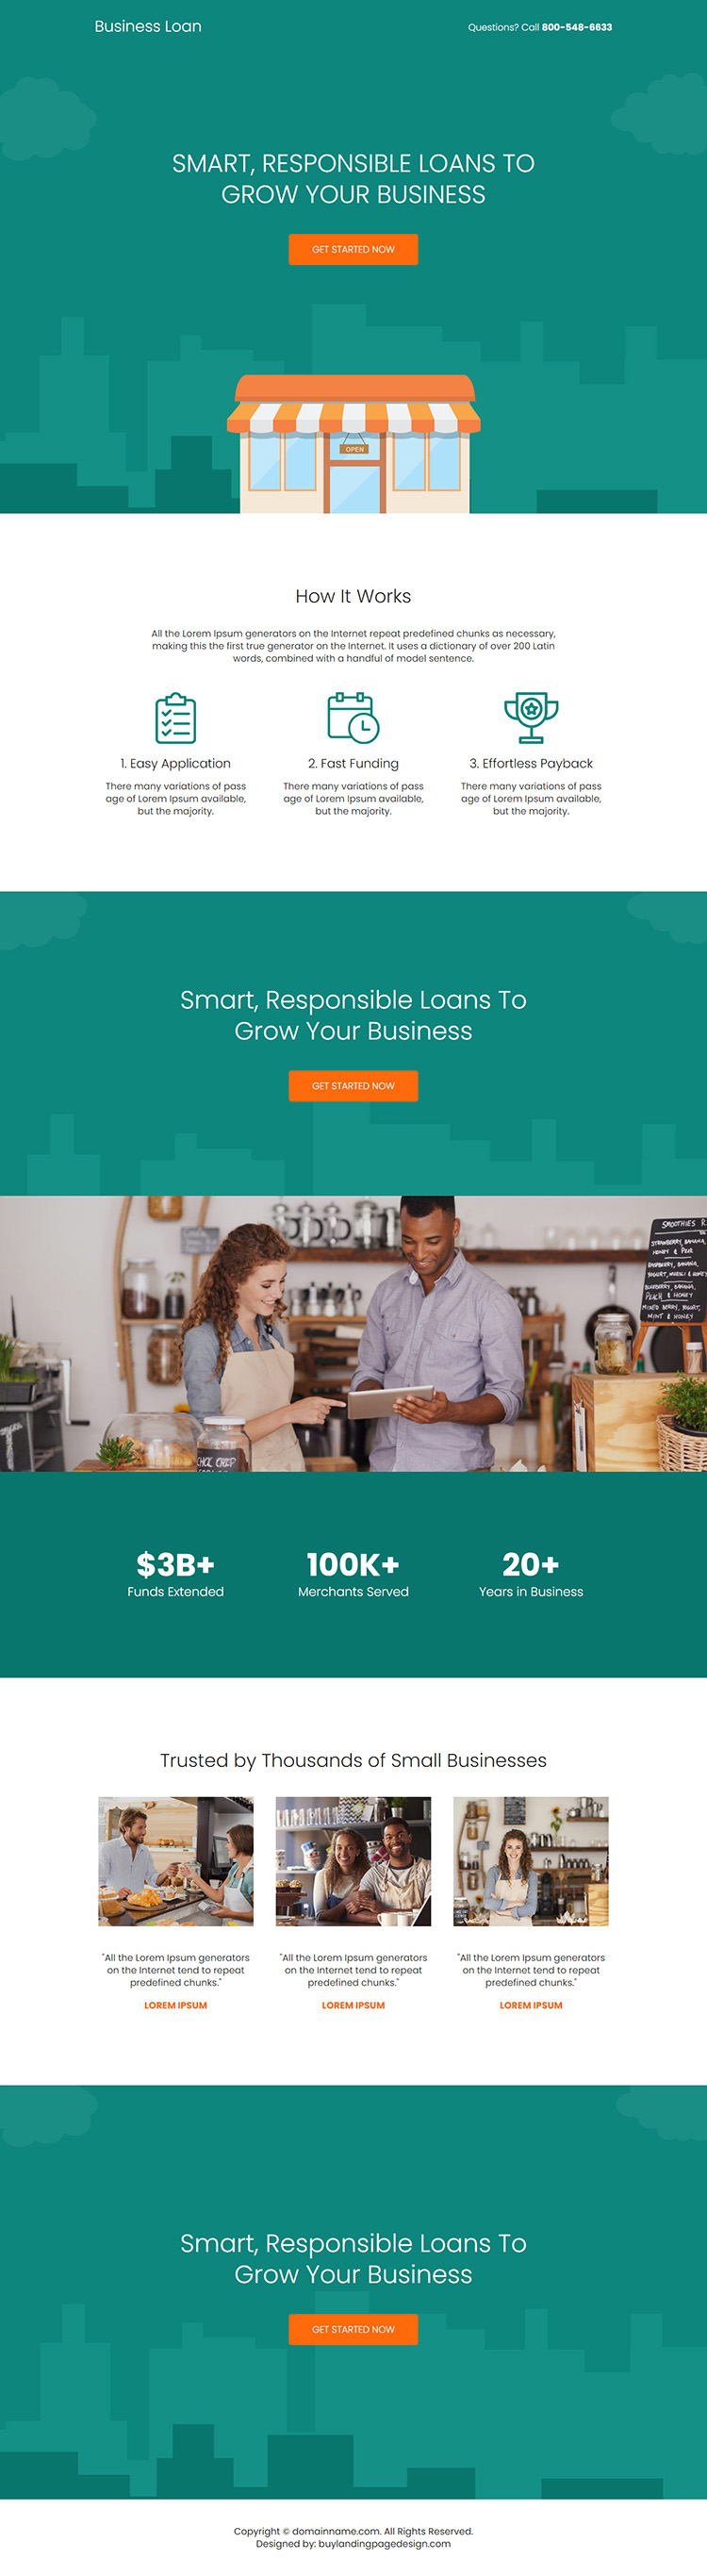 business loan easy application responsive landing page design